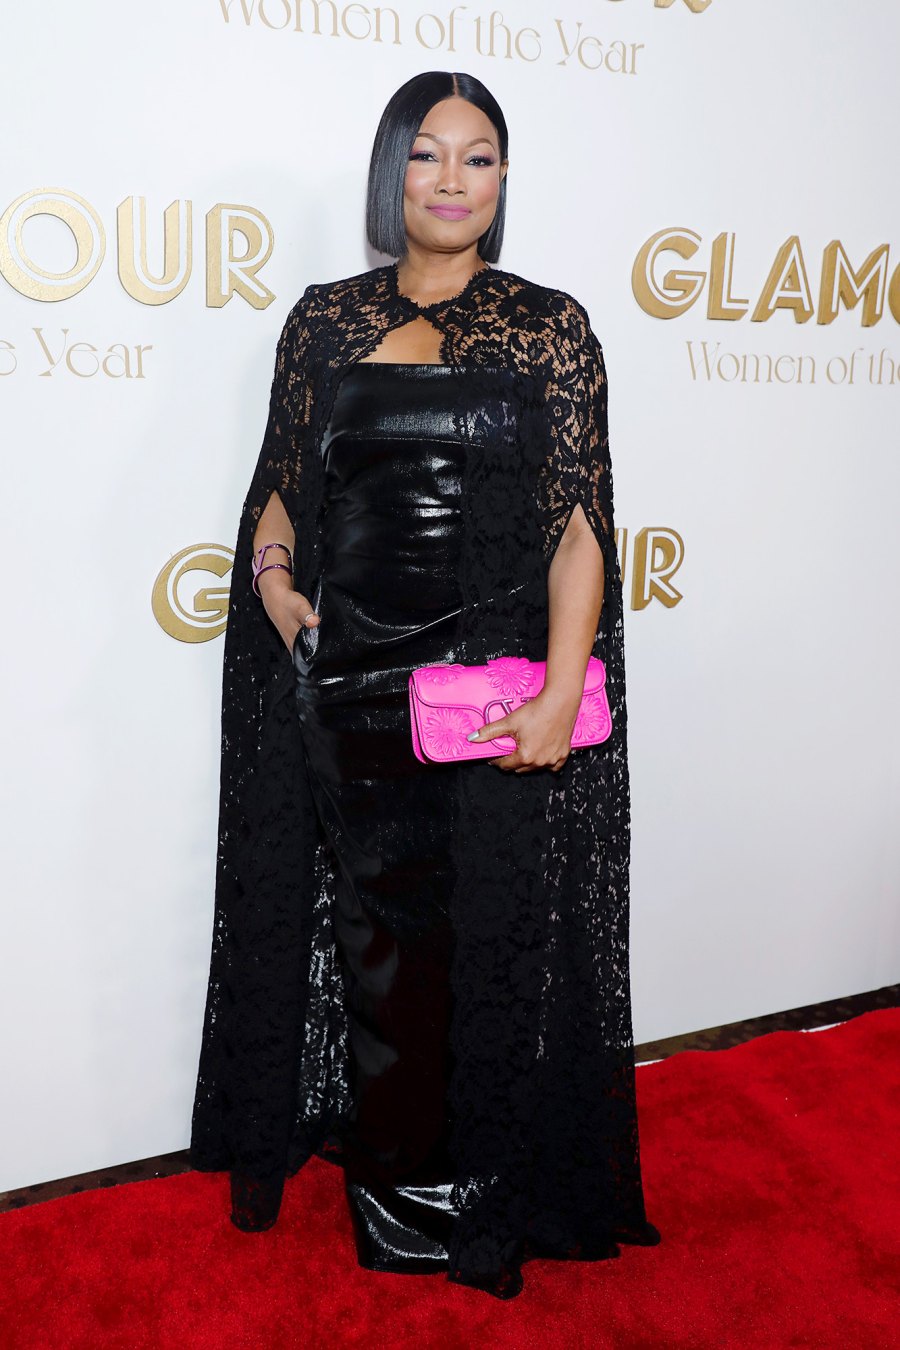 Best Celebrity Memoirs of 2022- Matthew Perry, Jennette McCurdy, Garcelle Beauvais and More 211 Glamour Women of the Year Awards, New York, USA - 01 Nov 2022